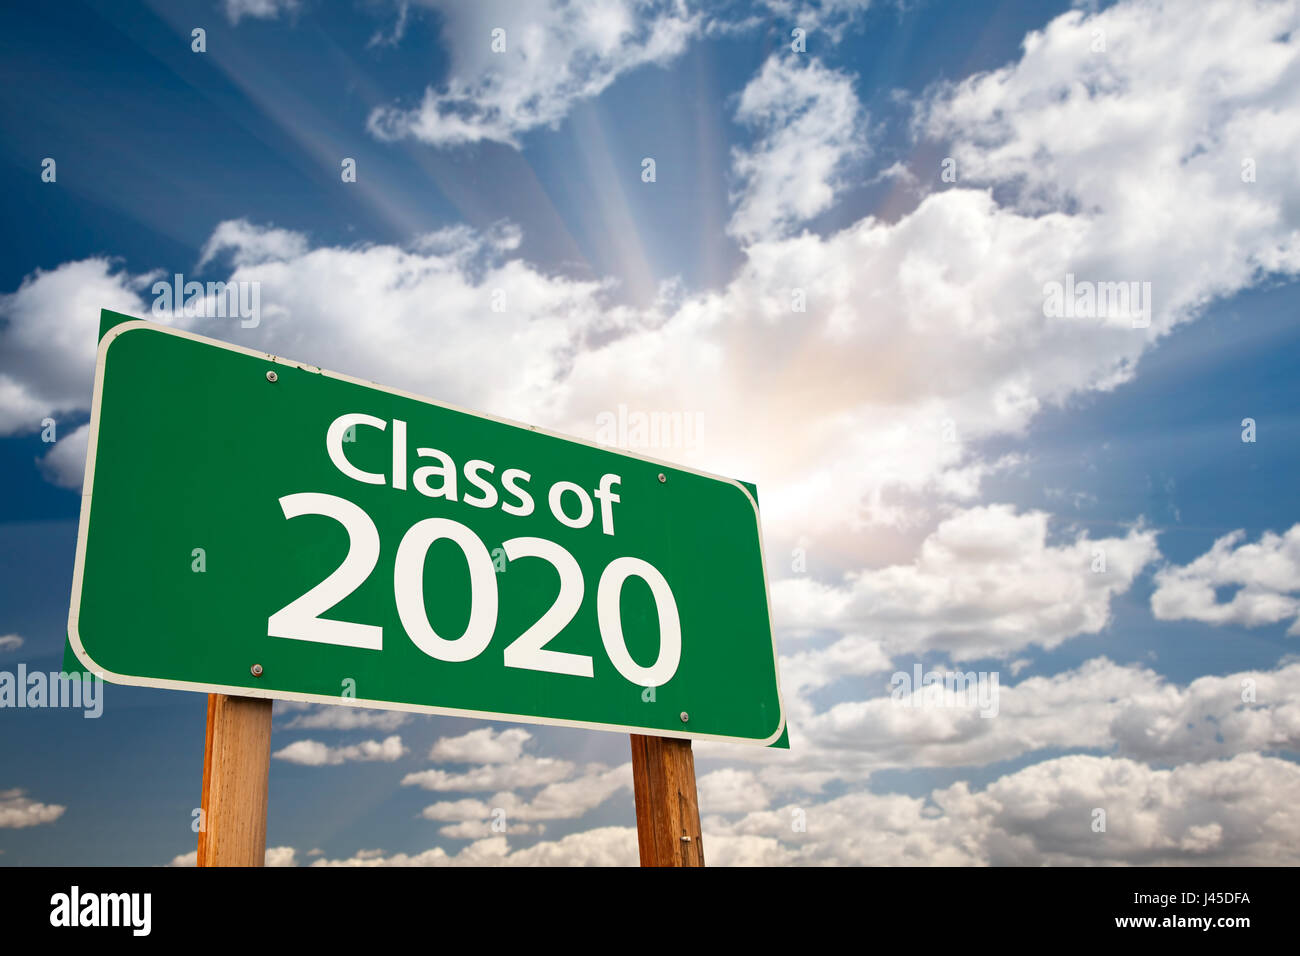 Class of 2020 Green Road Sign with Dramatic Clouds and Sky. Stock Photo